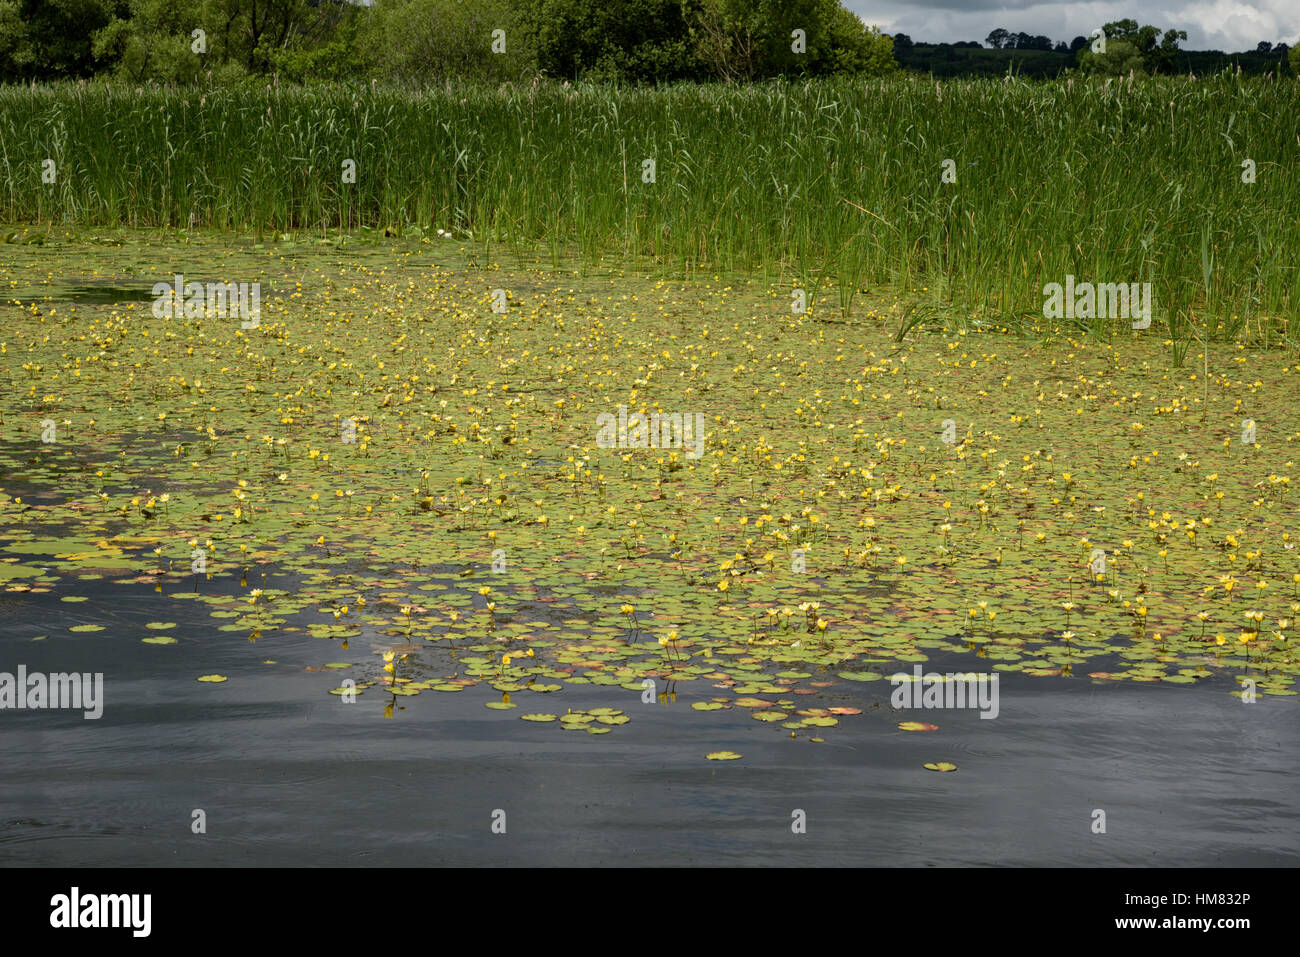 Fringed Water-lily, Nymphoides peltata Stock Photo